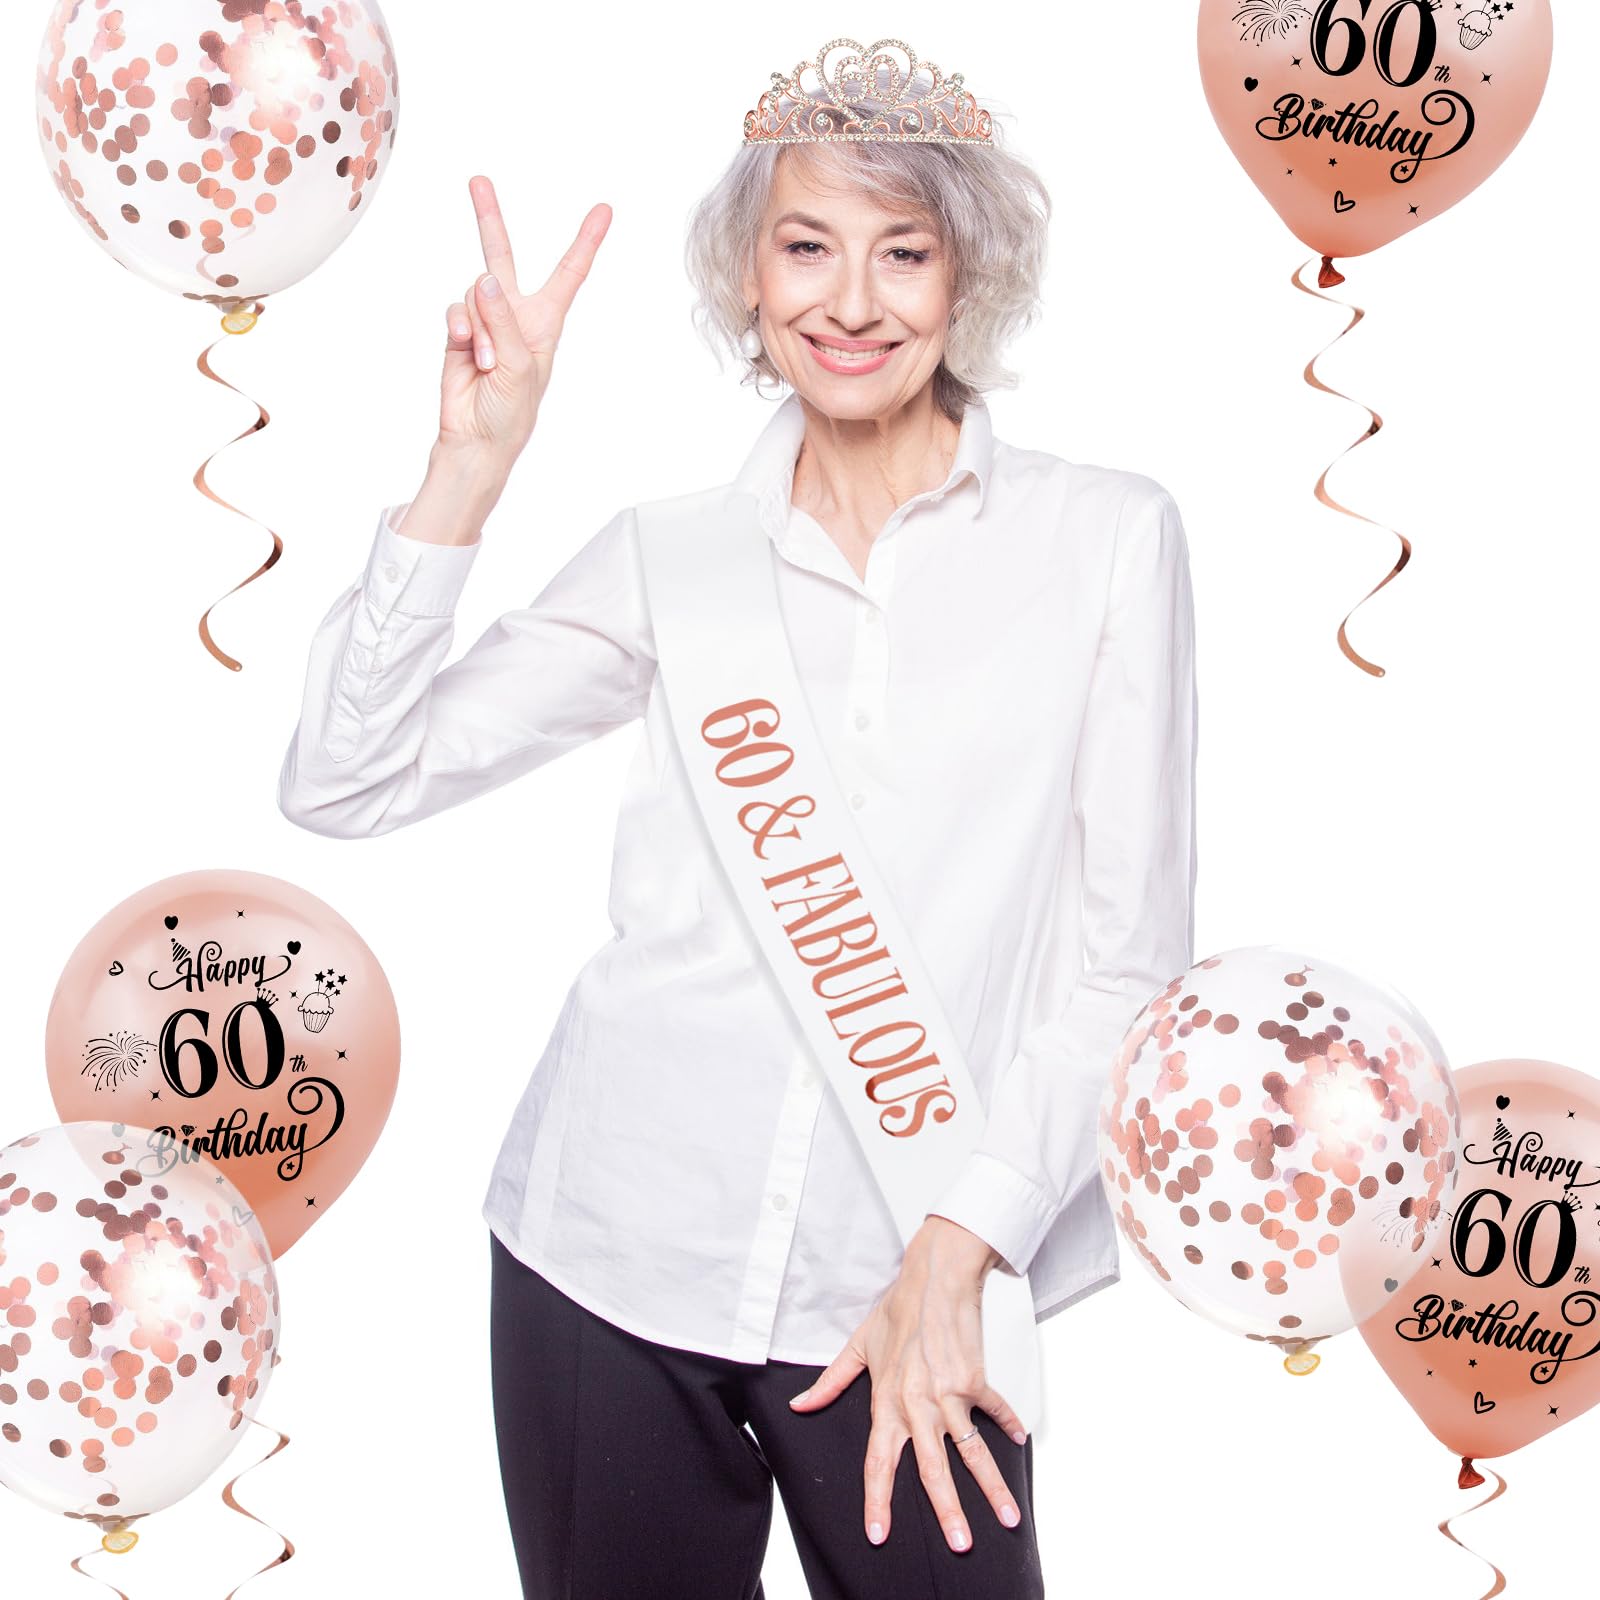 SKJIAYEE 60th Birthday Party Sash and Tiara Kits-60th ‘FABULOUS’ White Sash and Glitter Rose Gold Crown and Birthday Balloons for Women Birthday Party Decorations Supplies